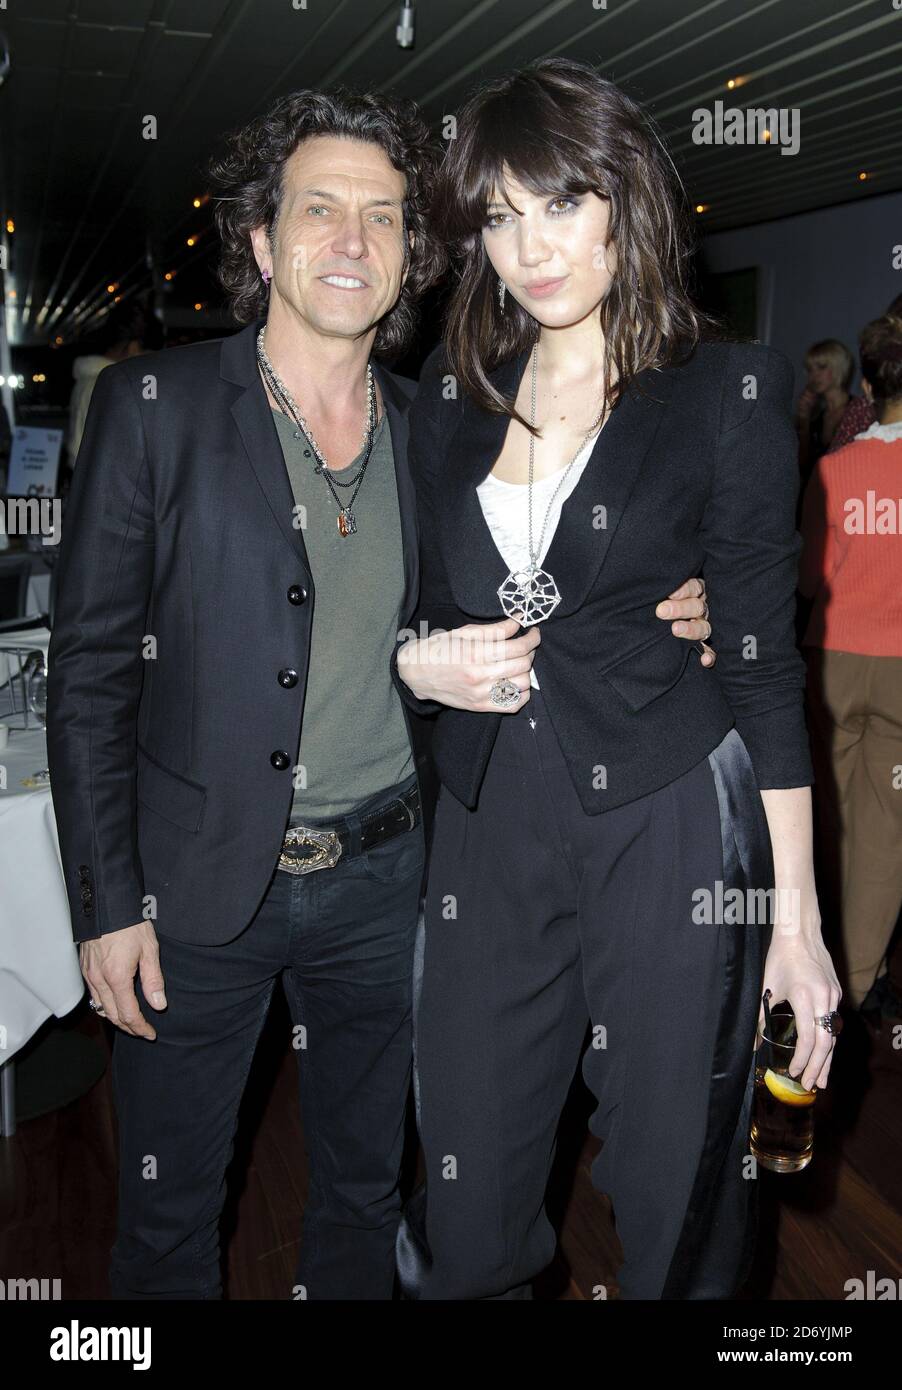 Stephen Webster and Daisy Lowe (wearing £1m of Webster Diamonds) attending the Wrigleys Extra Ice Eat Drink and Chew banquet, at Smiths of Smithfield in London.  Stock Photo